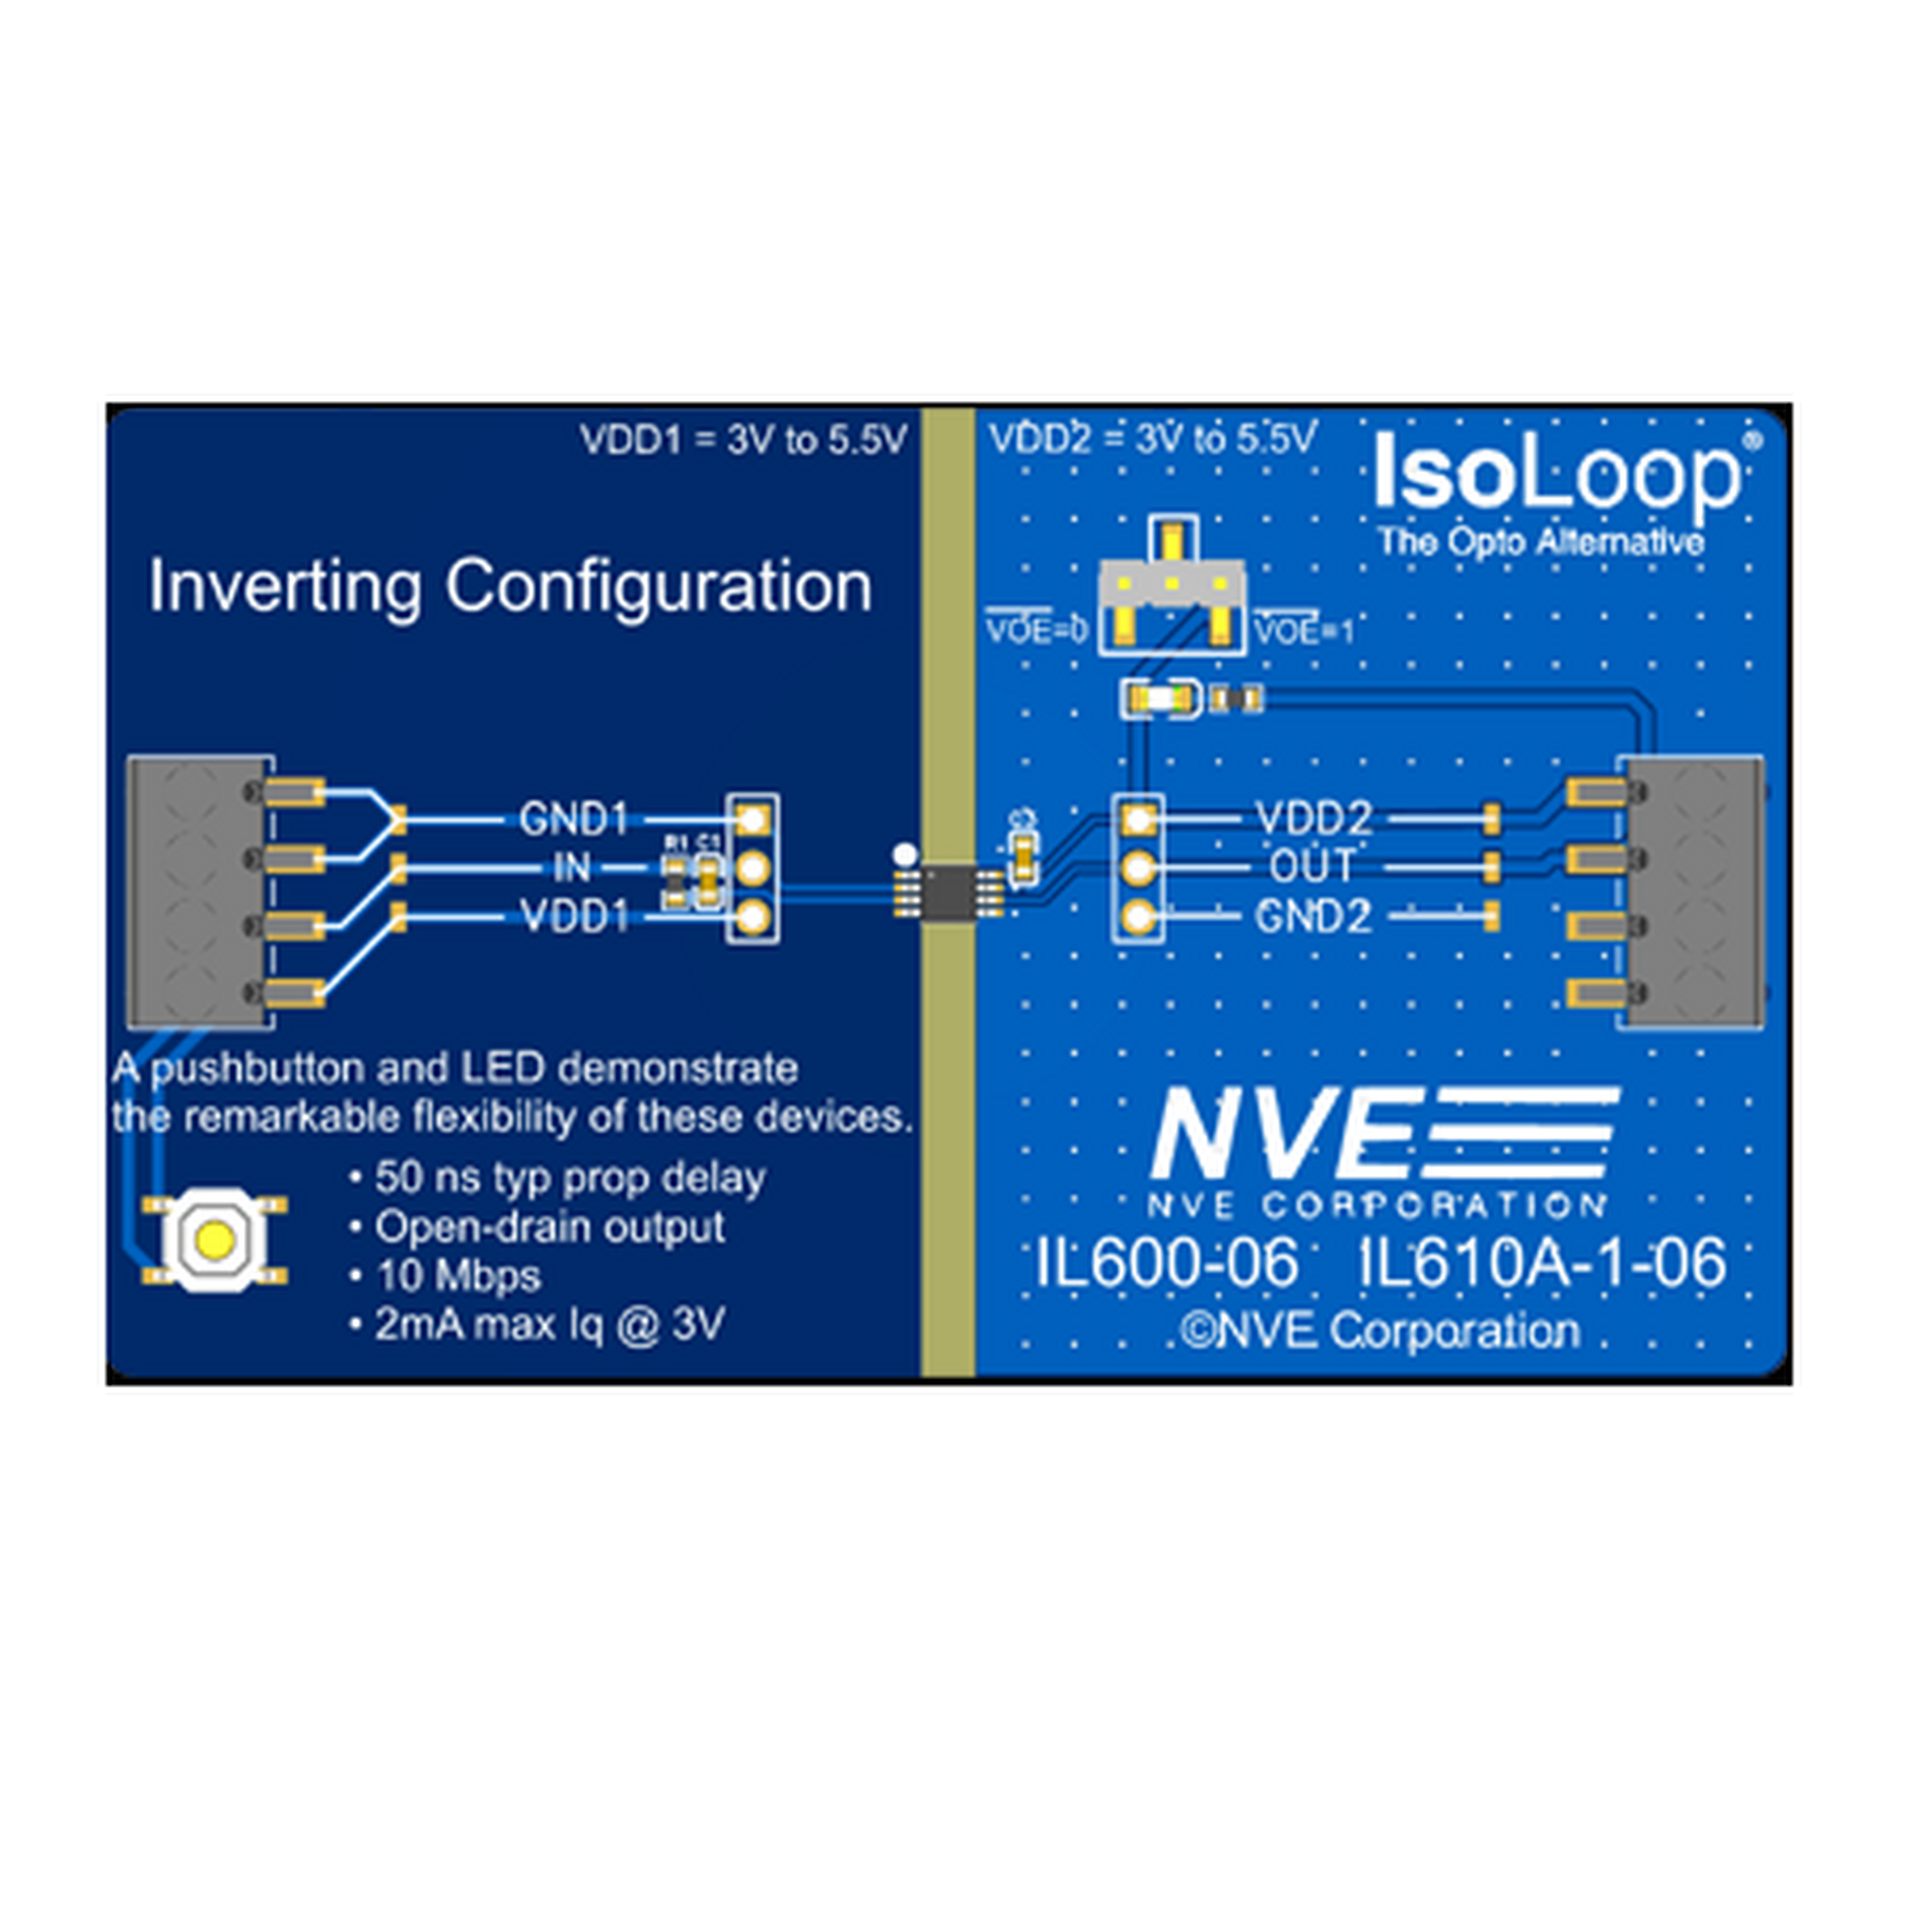 NVE Isoloop IL610 A